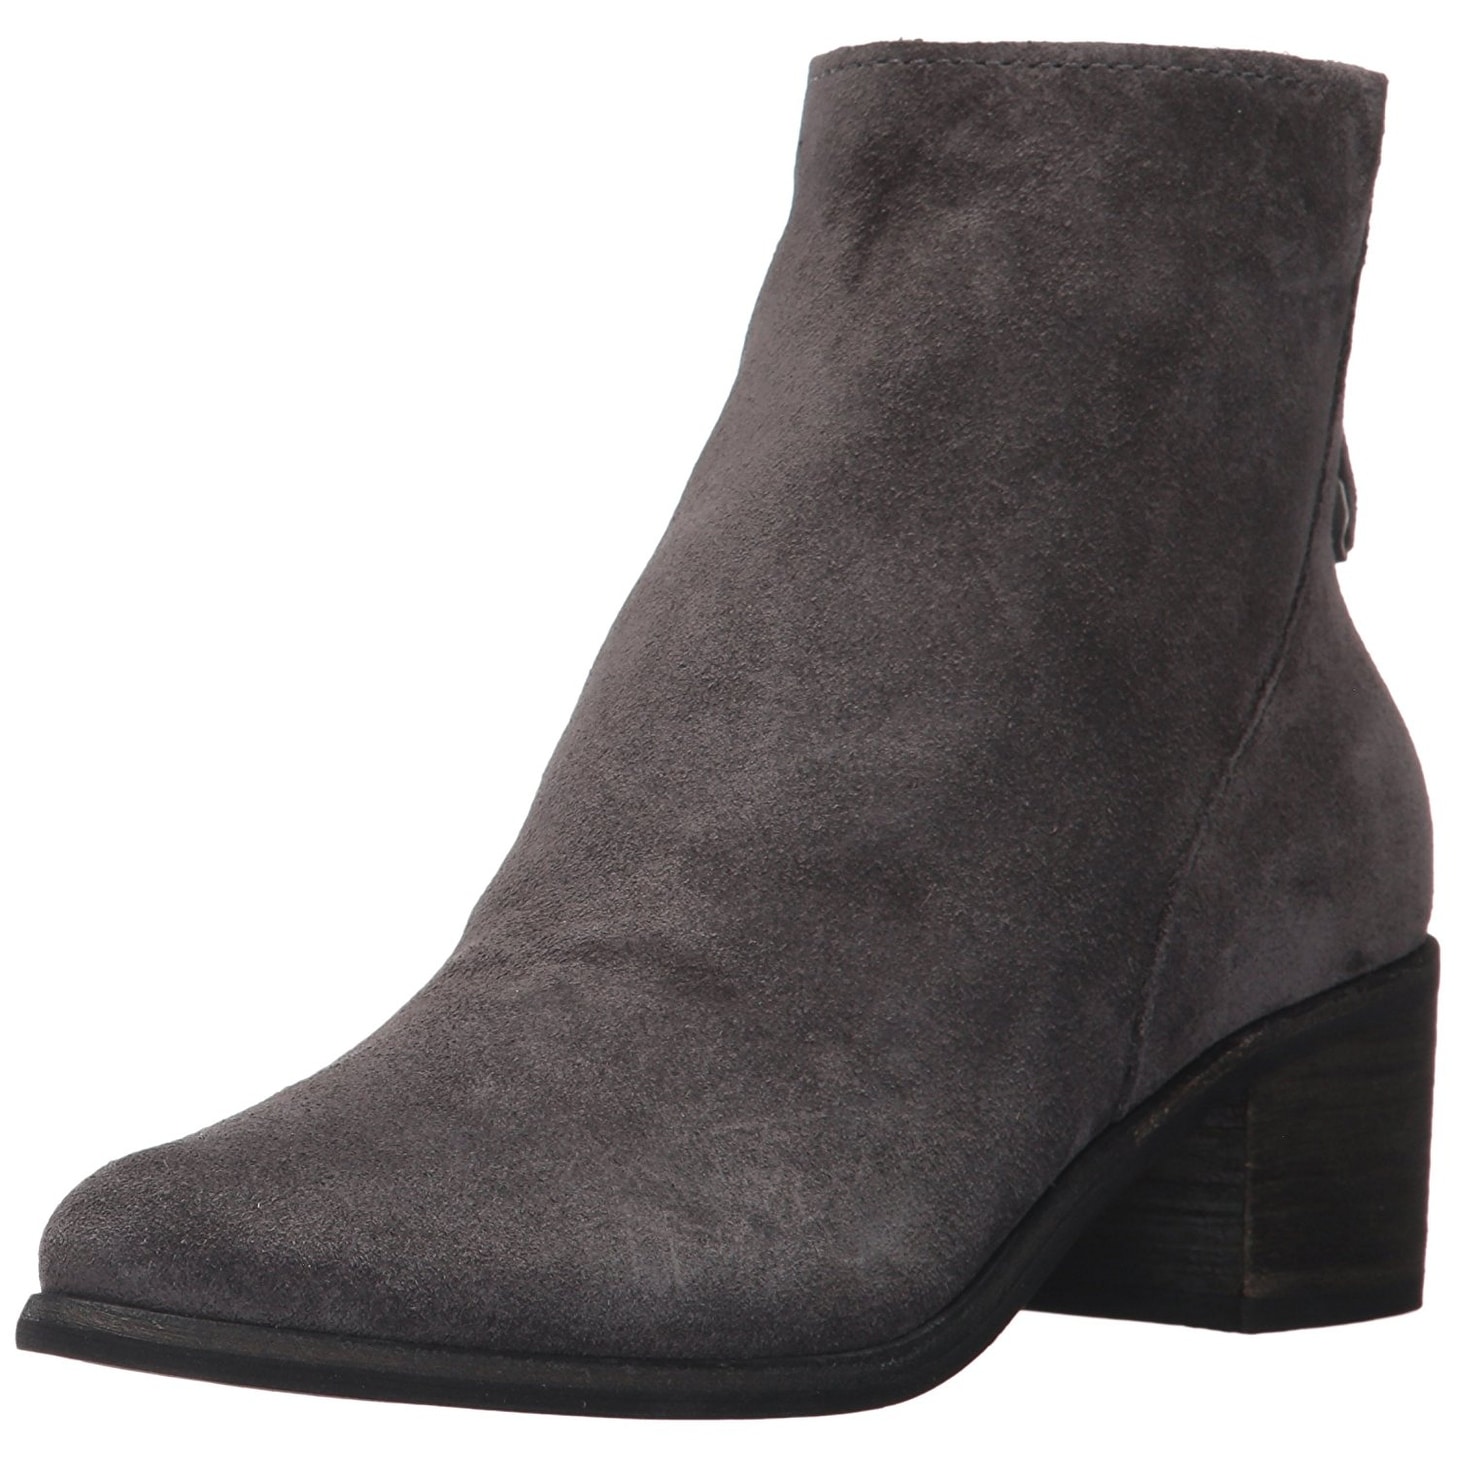 dolce vita women's cassius ankle boot